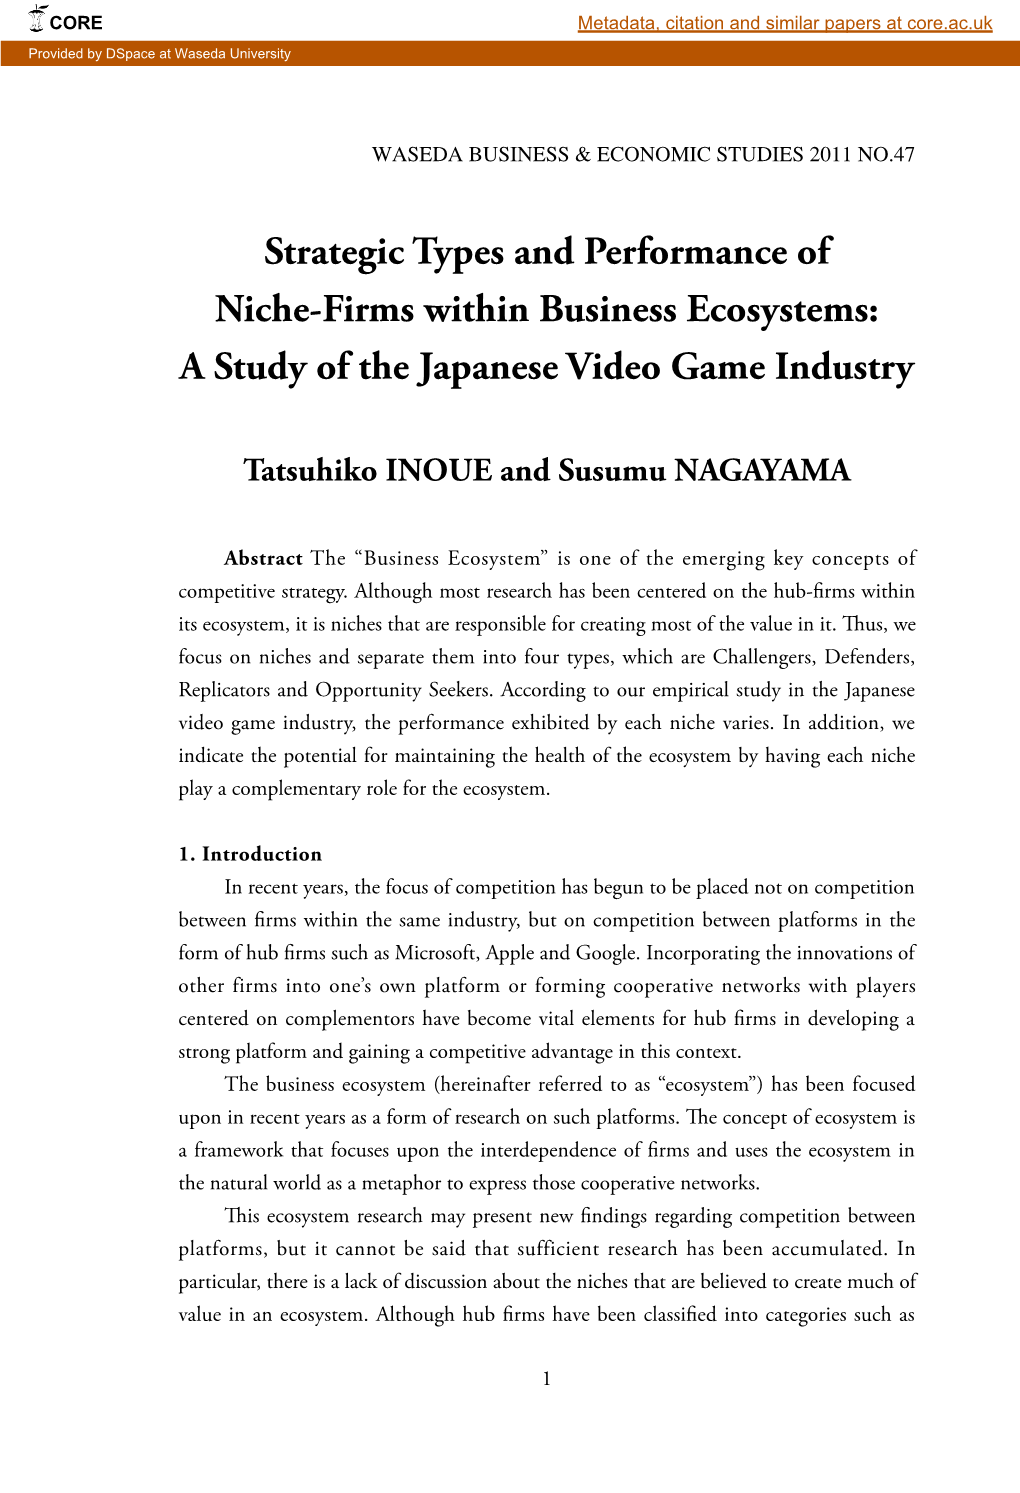 Strategic Types and Performance of Niche-Firms Within Business Ecosystems: a Study of the Japanese Video Game Industry